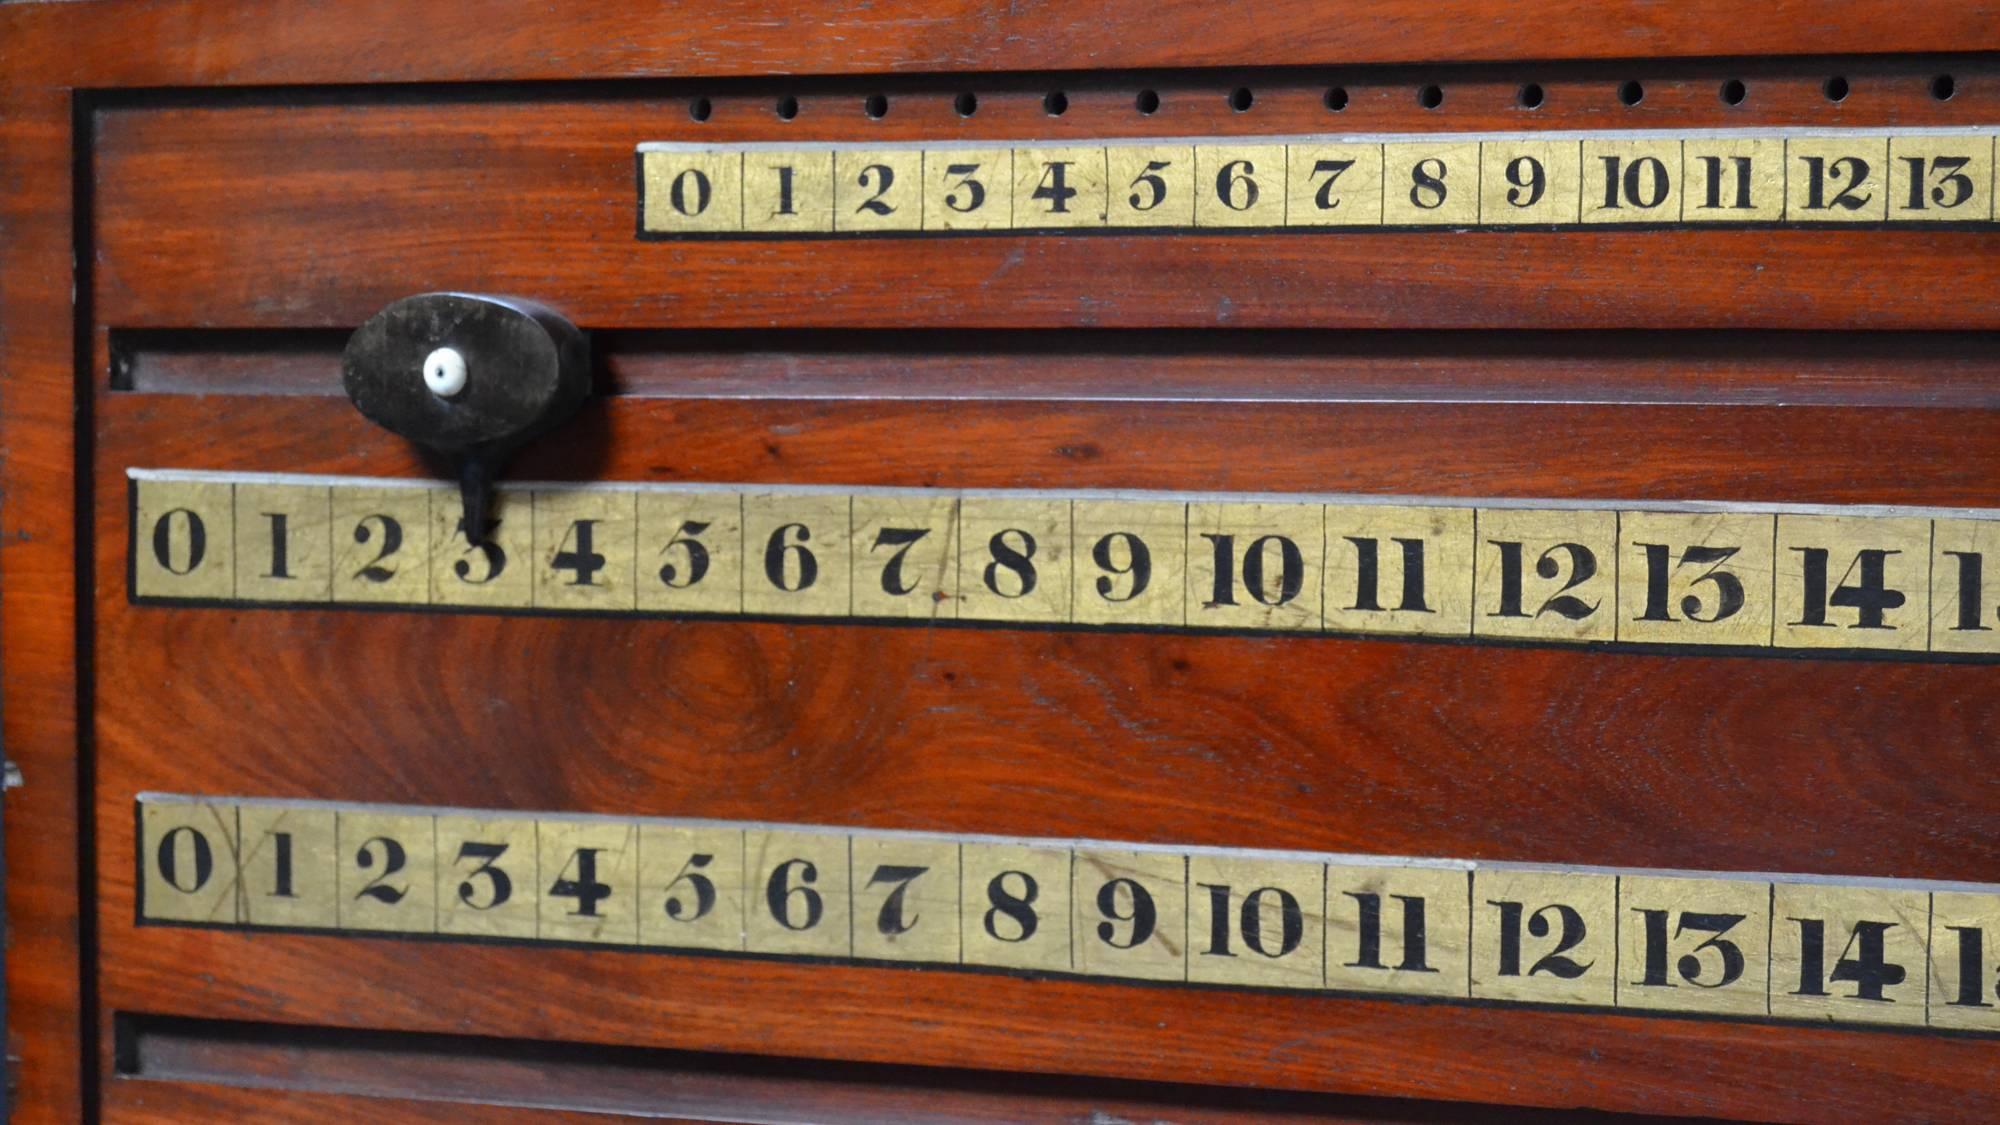 An exceptionally elegant wall-mounted mahogany framed Billiard marker by Gillow’s of London & Lancaster, circa 1820.

Beautifully constructed of the finest mahogany with gilded lettering and ebony inlay this scorer is one of the earliest we